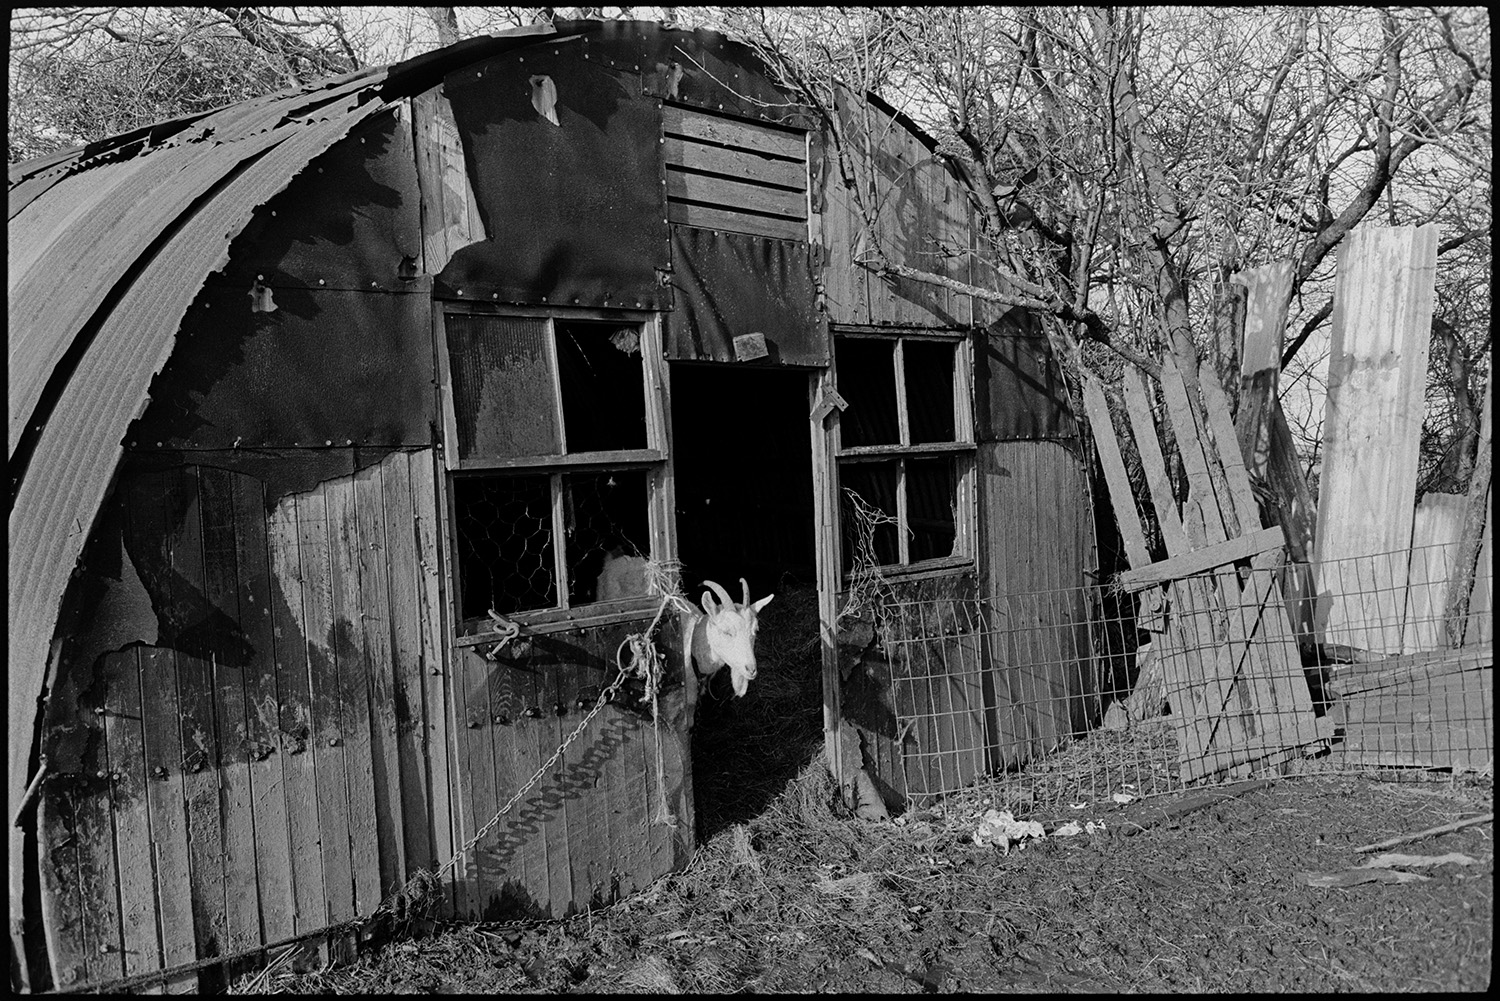 Muddy farmyard with Muscovy ducks, geese, goat, corrugated iron sheds, tractor tyre.
[A goat looking out of a nissen hut constructed of corrugated iron and rough wood planking, at Cuppers Piece, Beaford.]